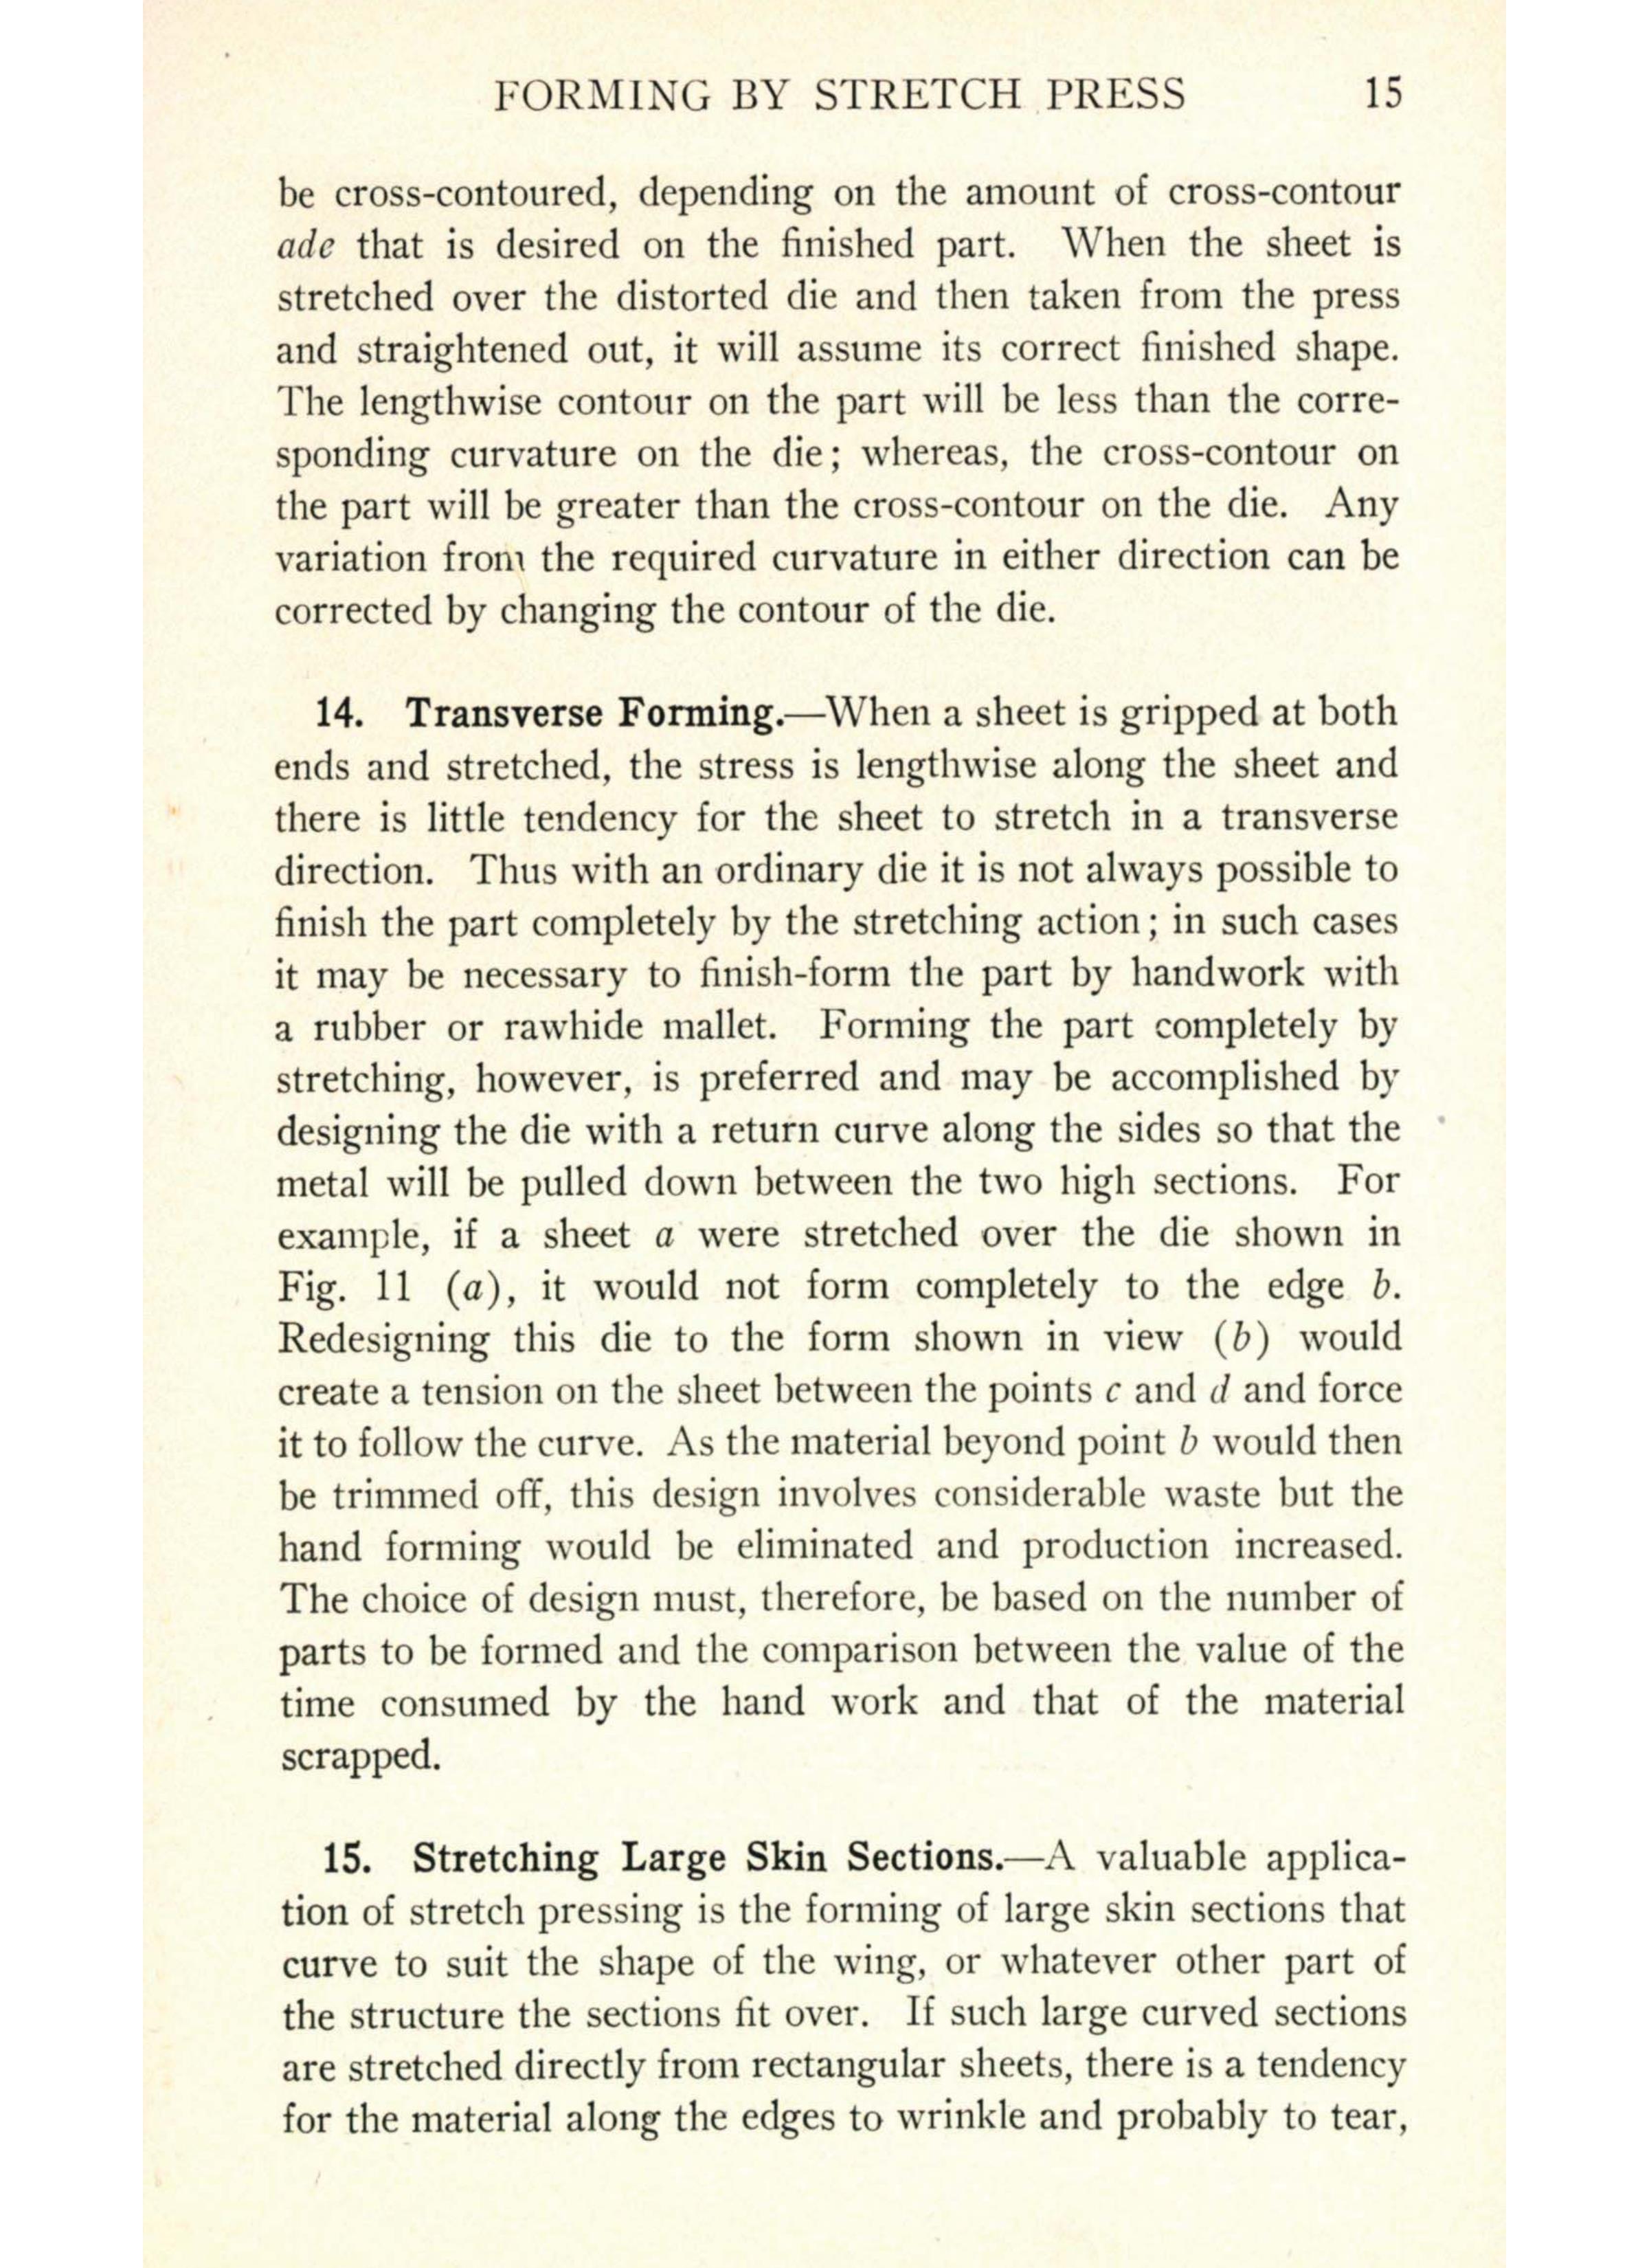 Sample page 17 from AirCorps Library document: Forming Methods - Stretch Press - Bureau of Aeronautics